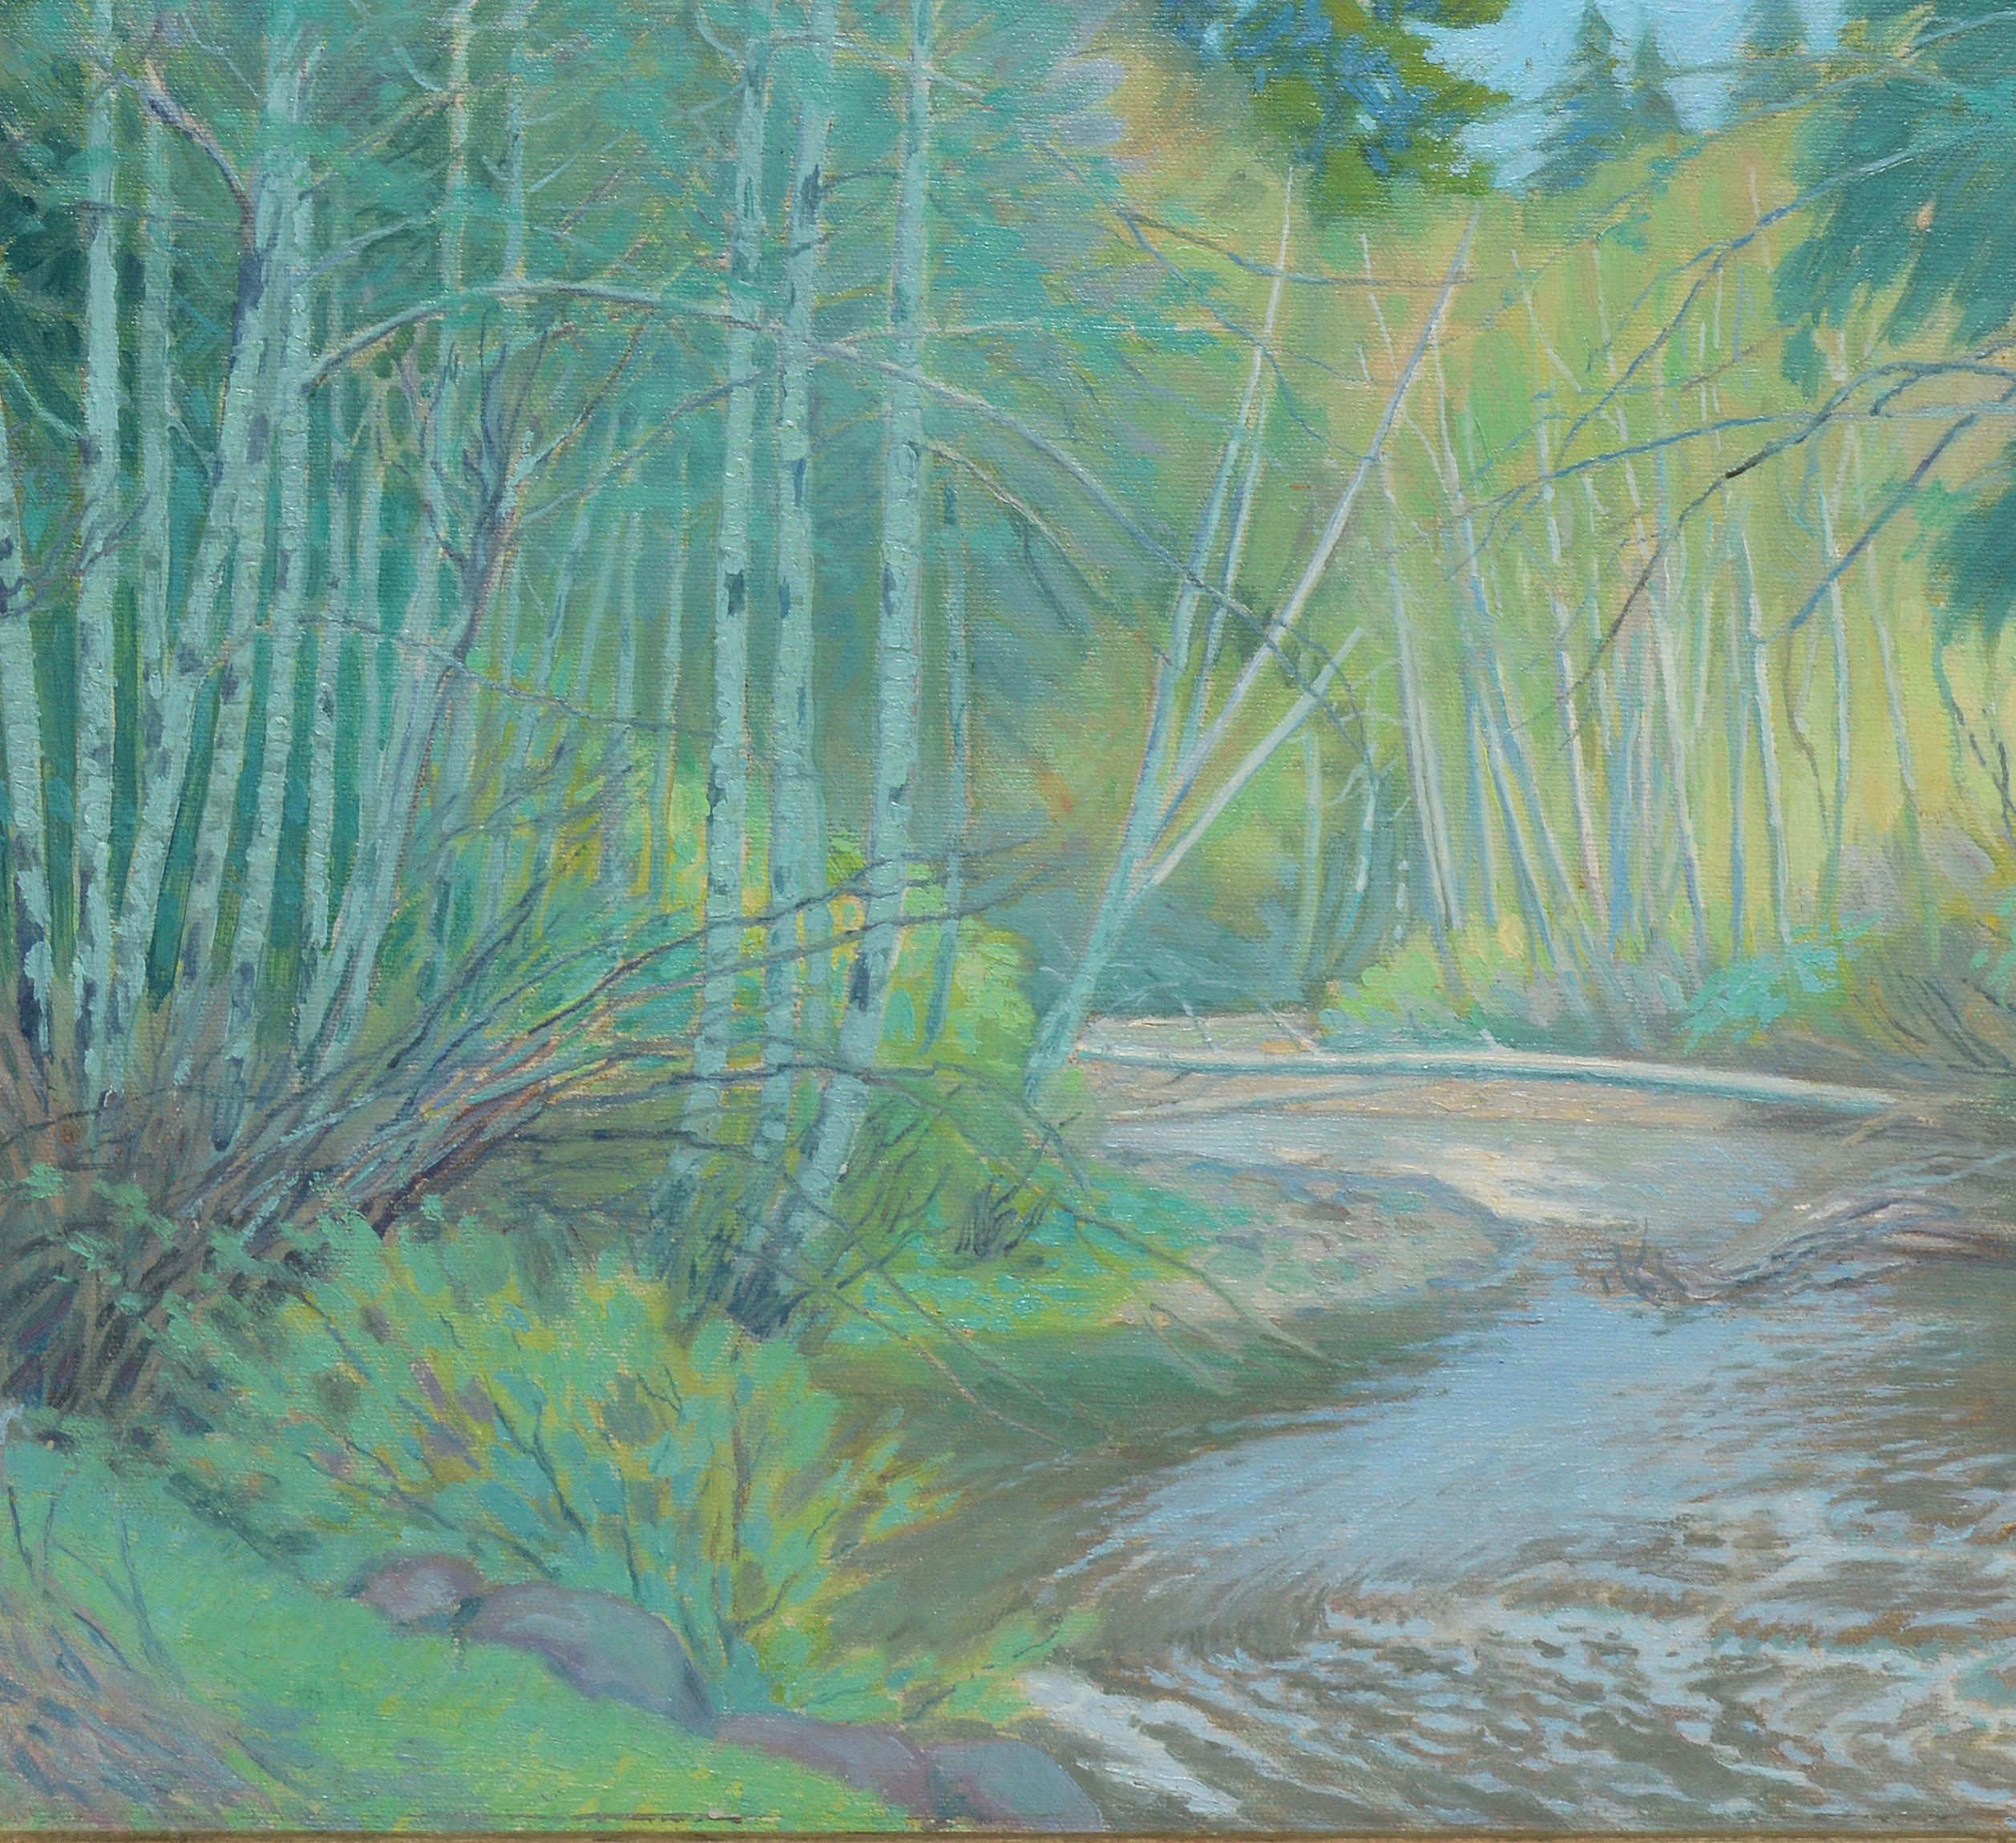 Impressionist view of a brook in a forest.  Oil on canvas, circa 1940.  Signed illegibly lower right.  Displayed in a wood frame.  Image size, 18